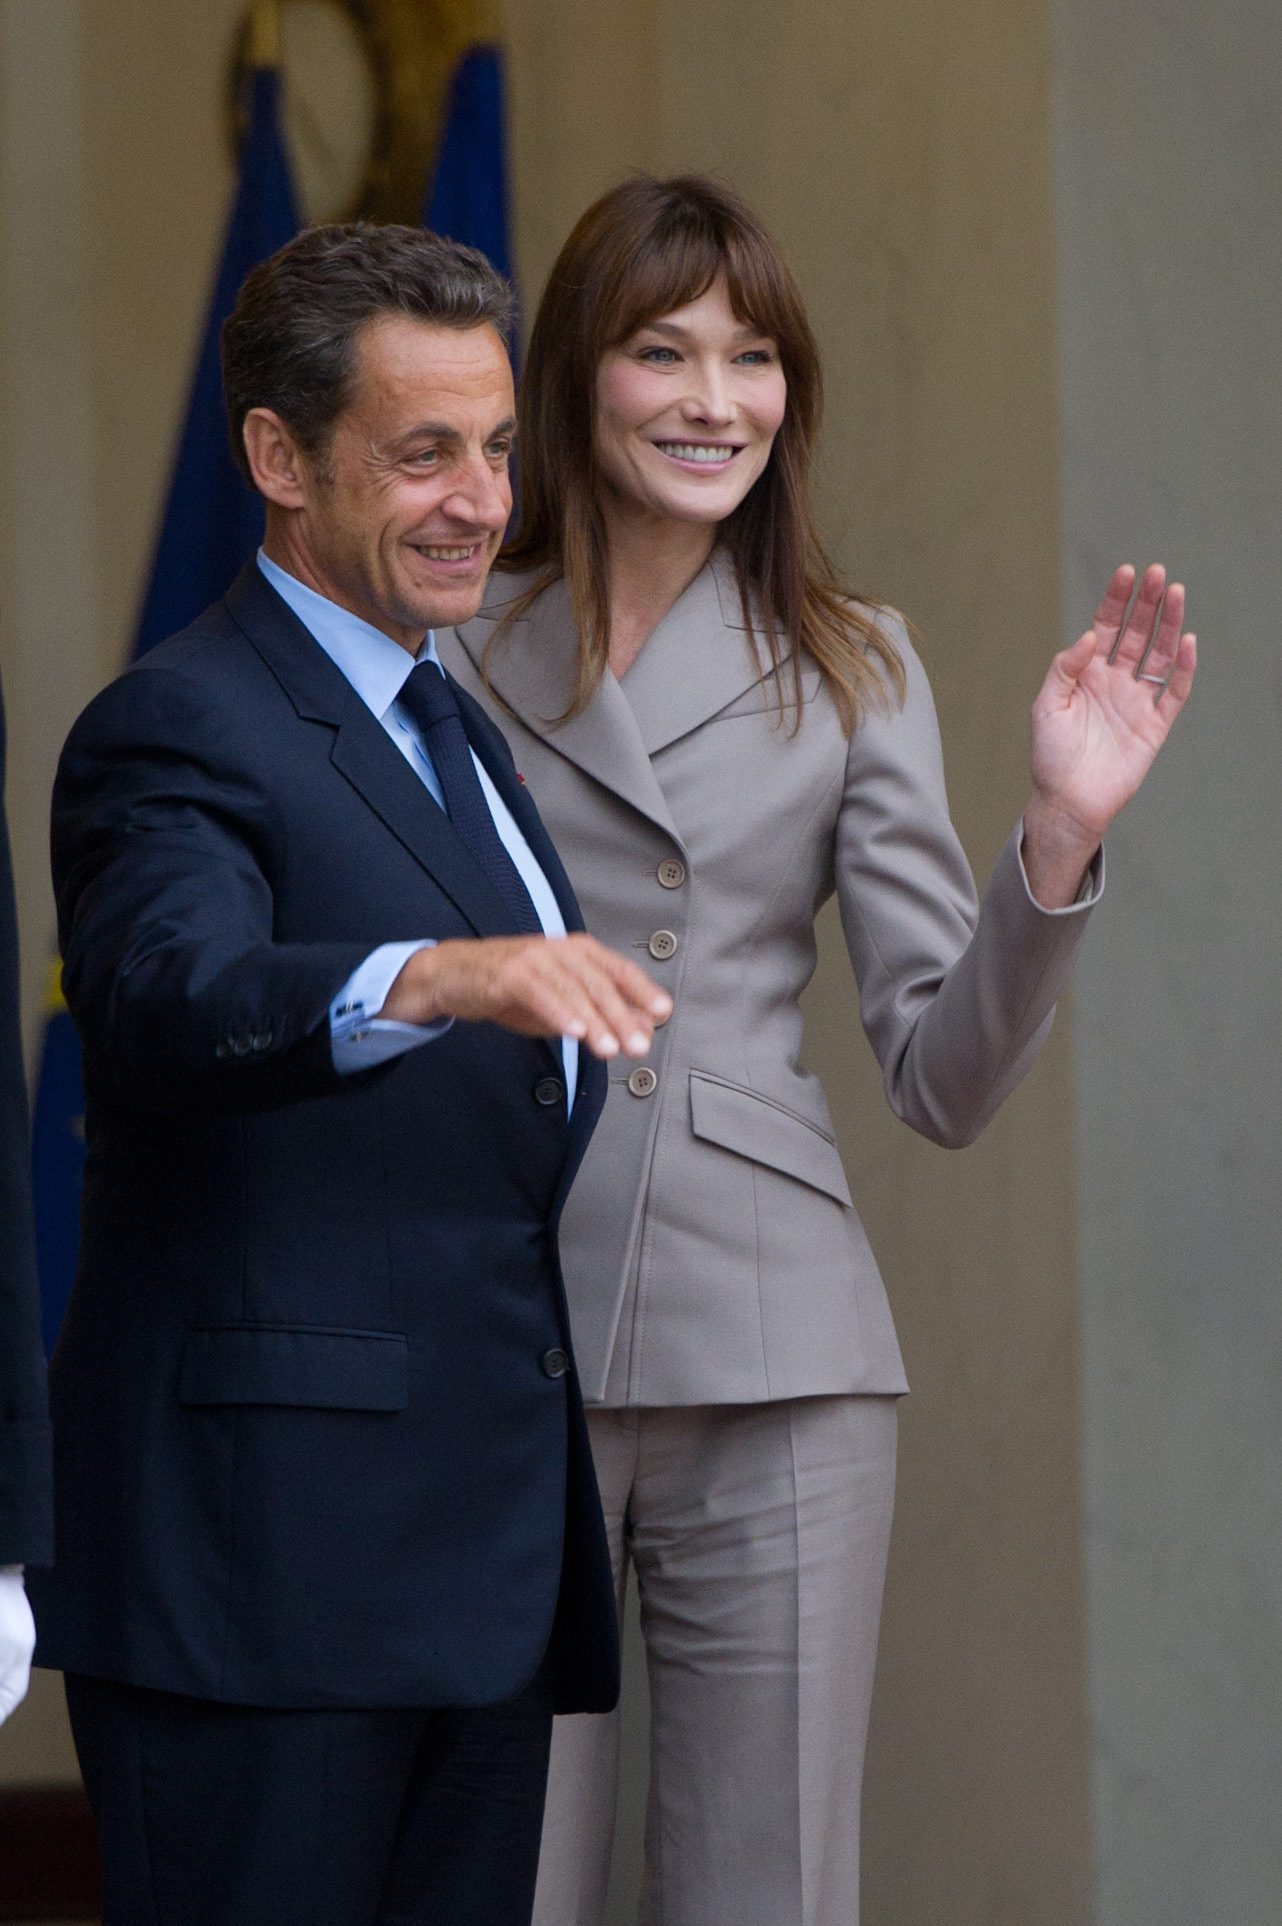 Paris ,France 2010 September 27 - Crown Princess Victoria of Sweden and her husband Prince Daniel are invited to meet president Nicolas Sarkozy and his wife Carla Bruni Sarkozy at the Elysee Palace  on September 28, 2010.
STOCK PICTURES - Carla Bruni and Nicolas Sarkozy arrive at maternity clinic - Nicolas Sarkozy, the French president, joined his wife Carla Bruni on Wednesday at the Paris maternity clinic where she is due to give birth., Image: 105035292, License: Rights-managed, Restrictions: , Model Release: no, Credit line: Remi OCHLIK / MAXPPP / Profimedia